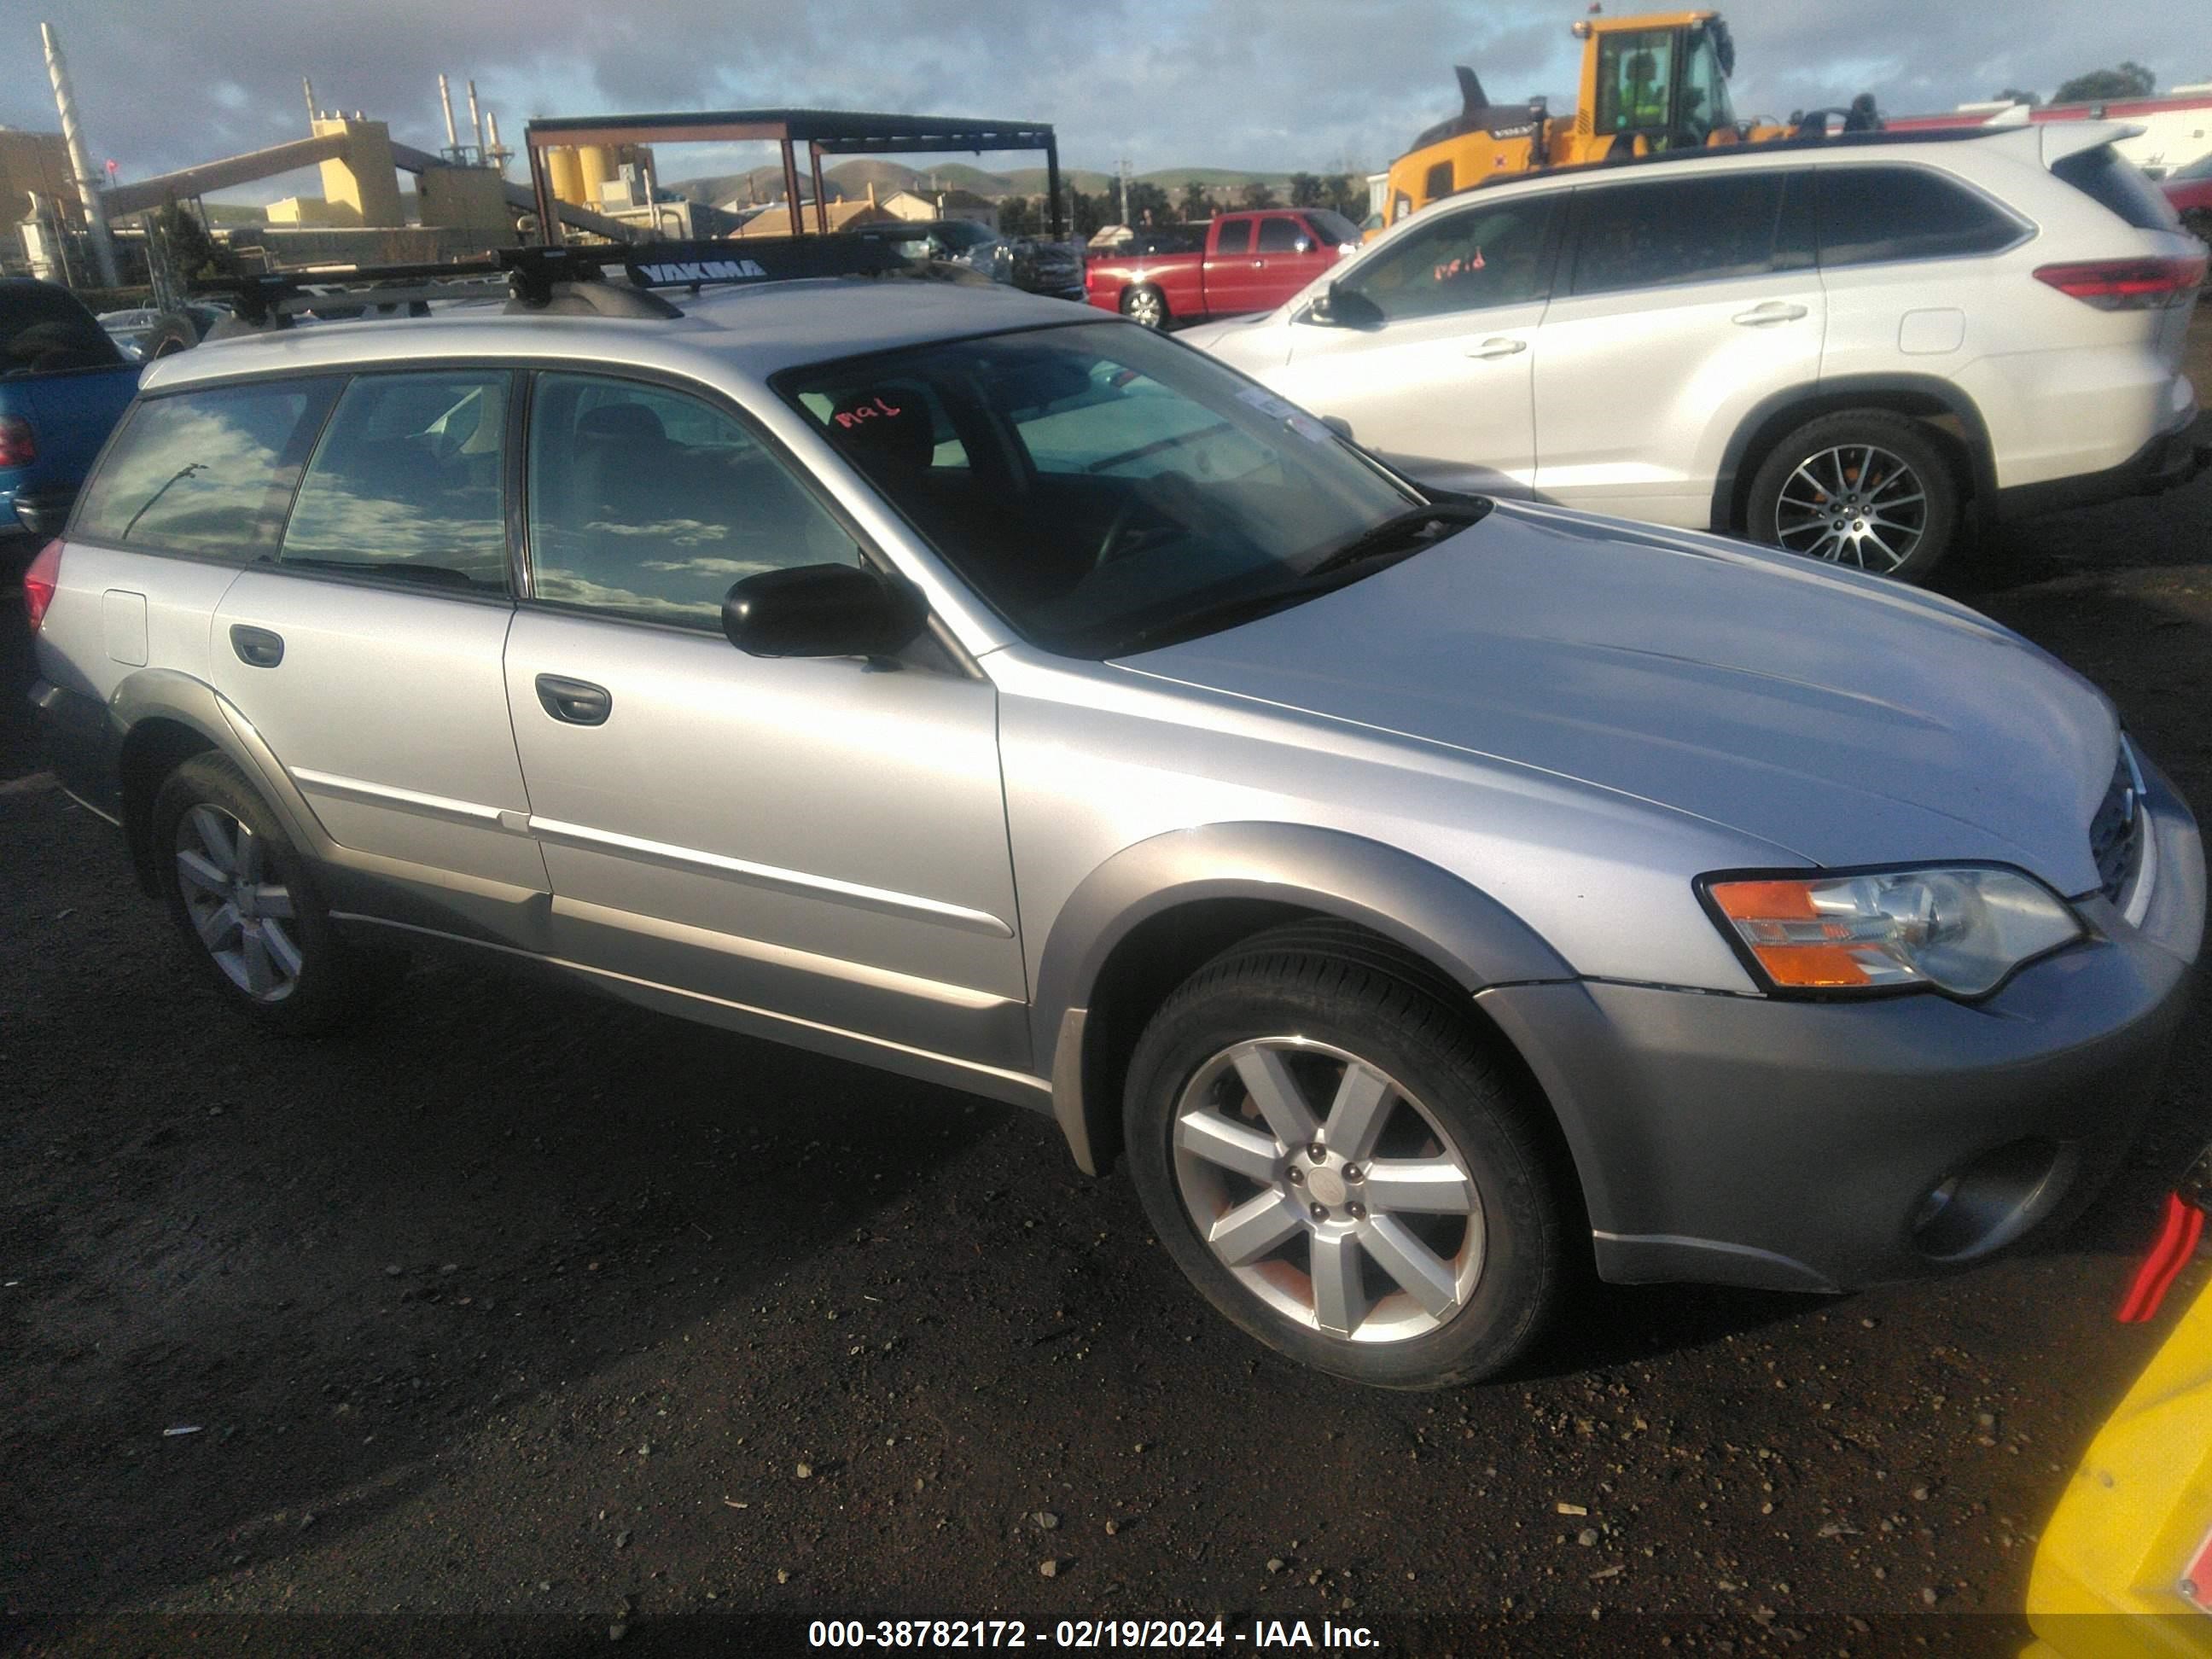 vin: 4S4BP61CX66316328 4S4BP61CX66316328 2006 subaru outback 2500 for Sale in 94565, 2780 Willow Pass Road, Bay Point, USA